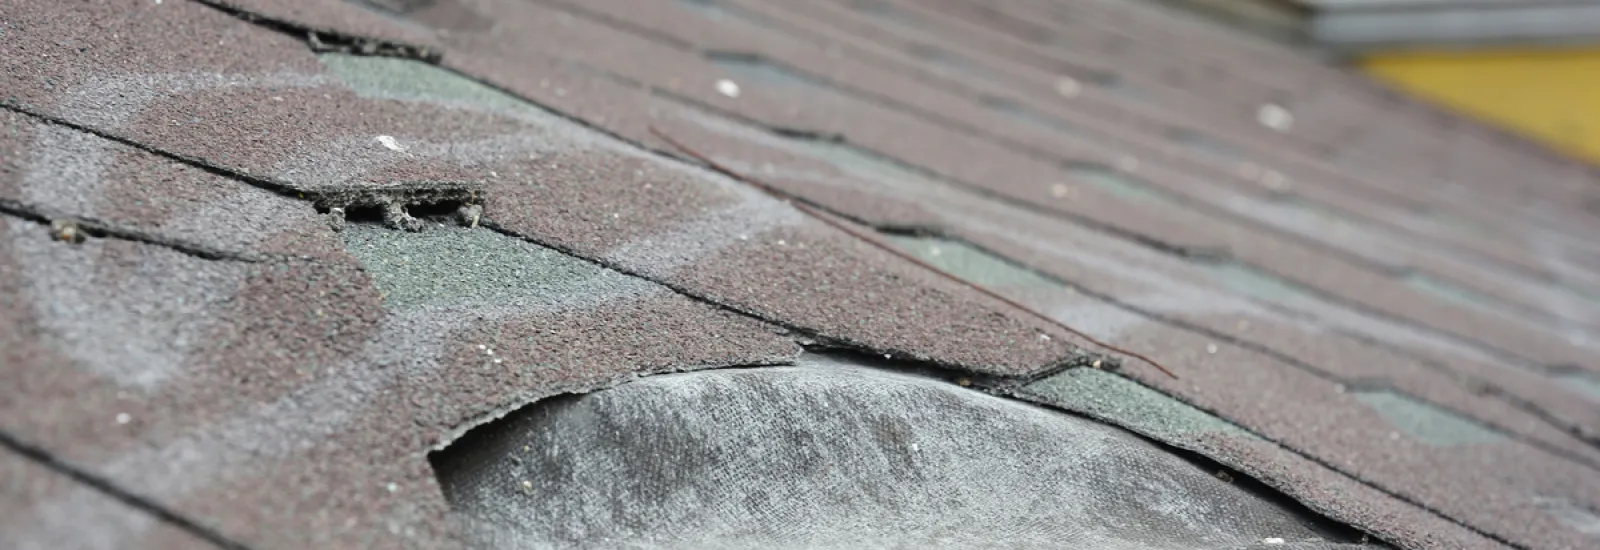 Common Roofing Issues and What to Do About Them